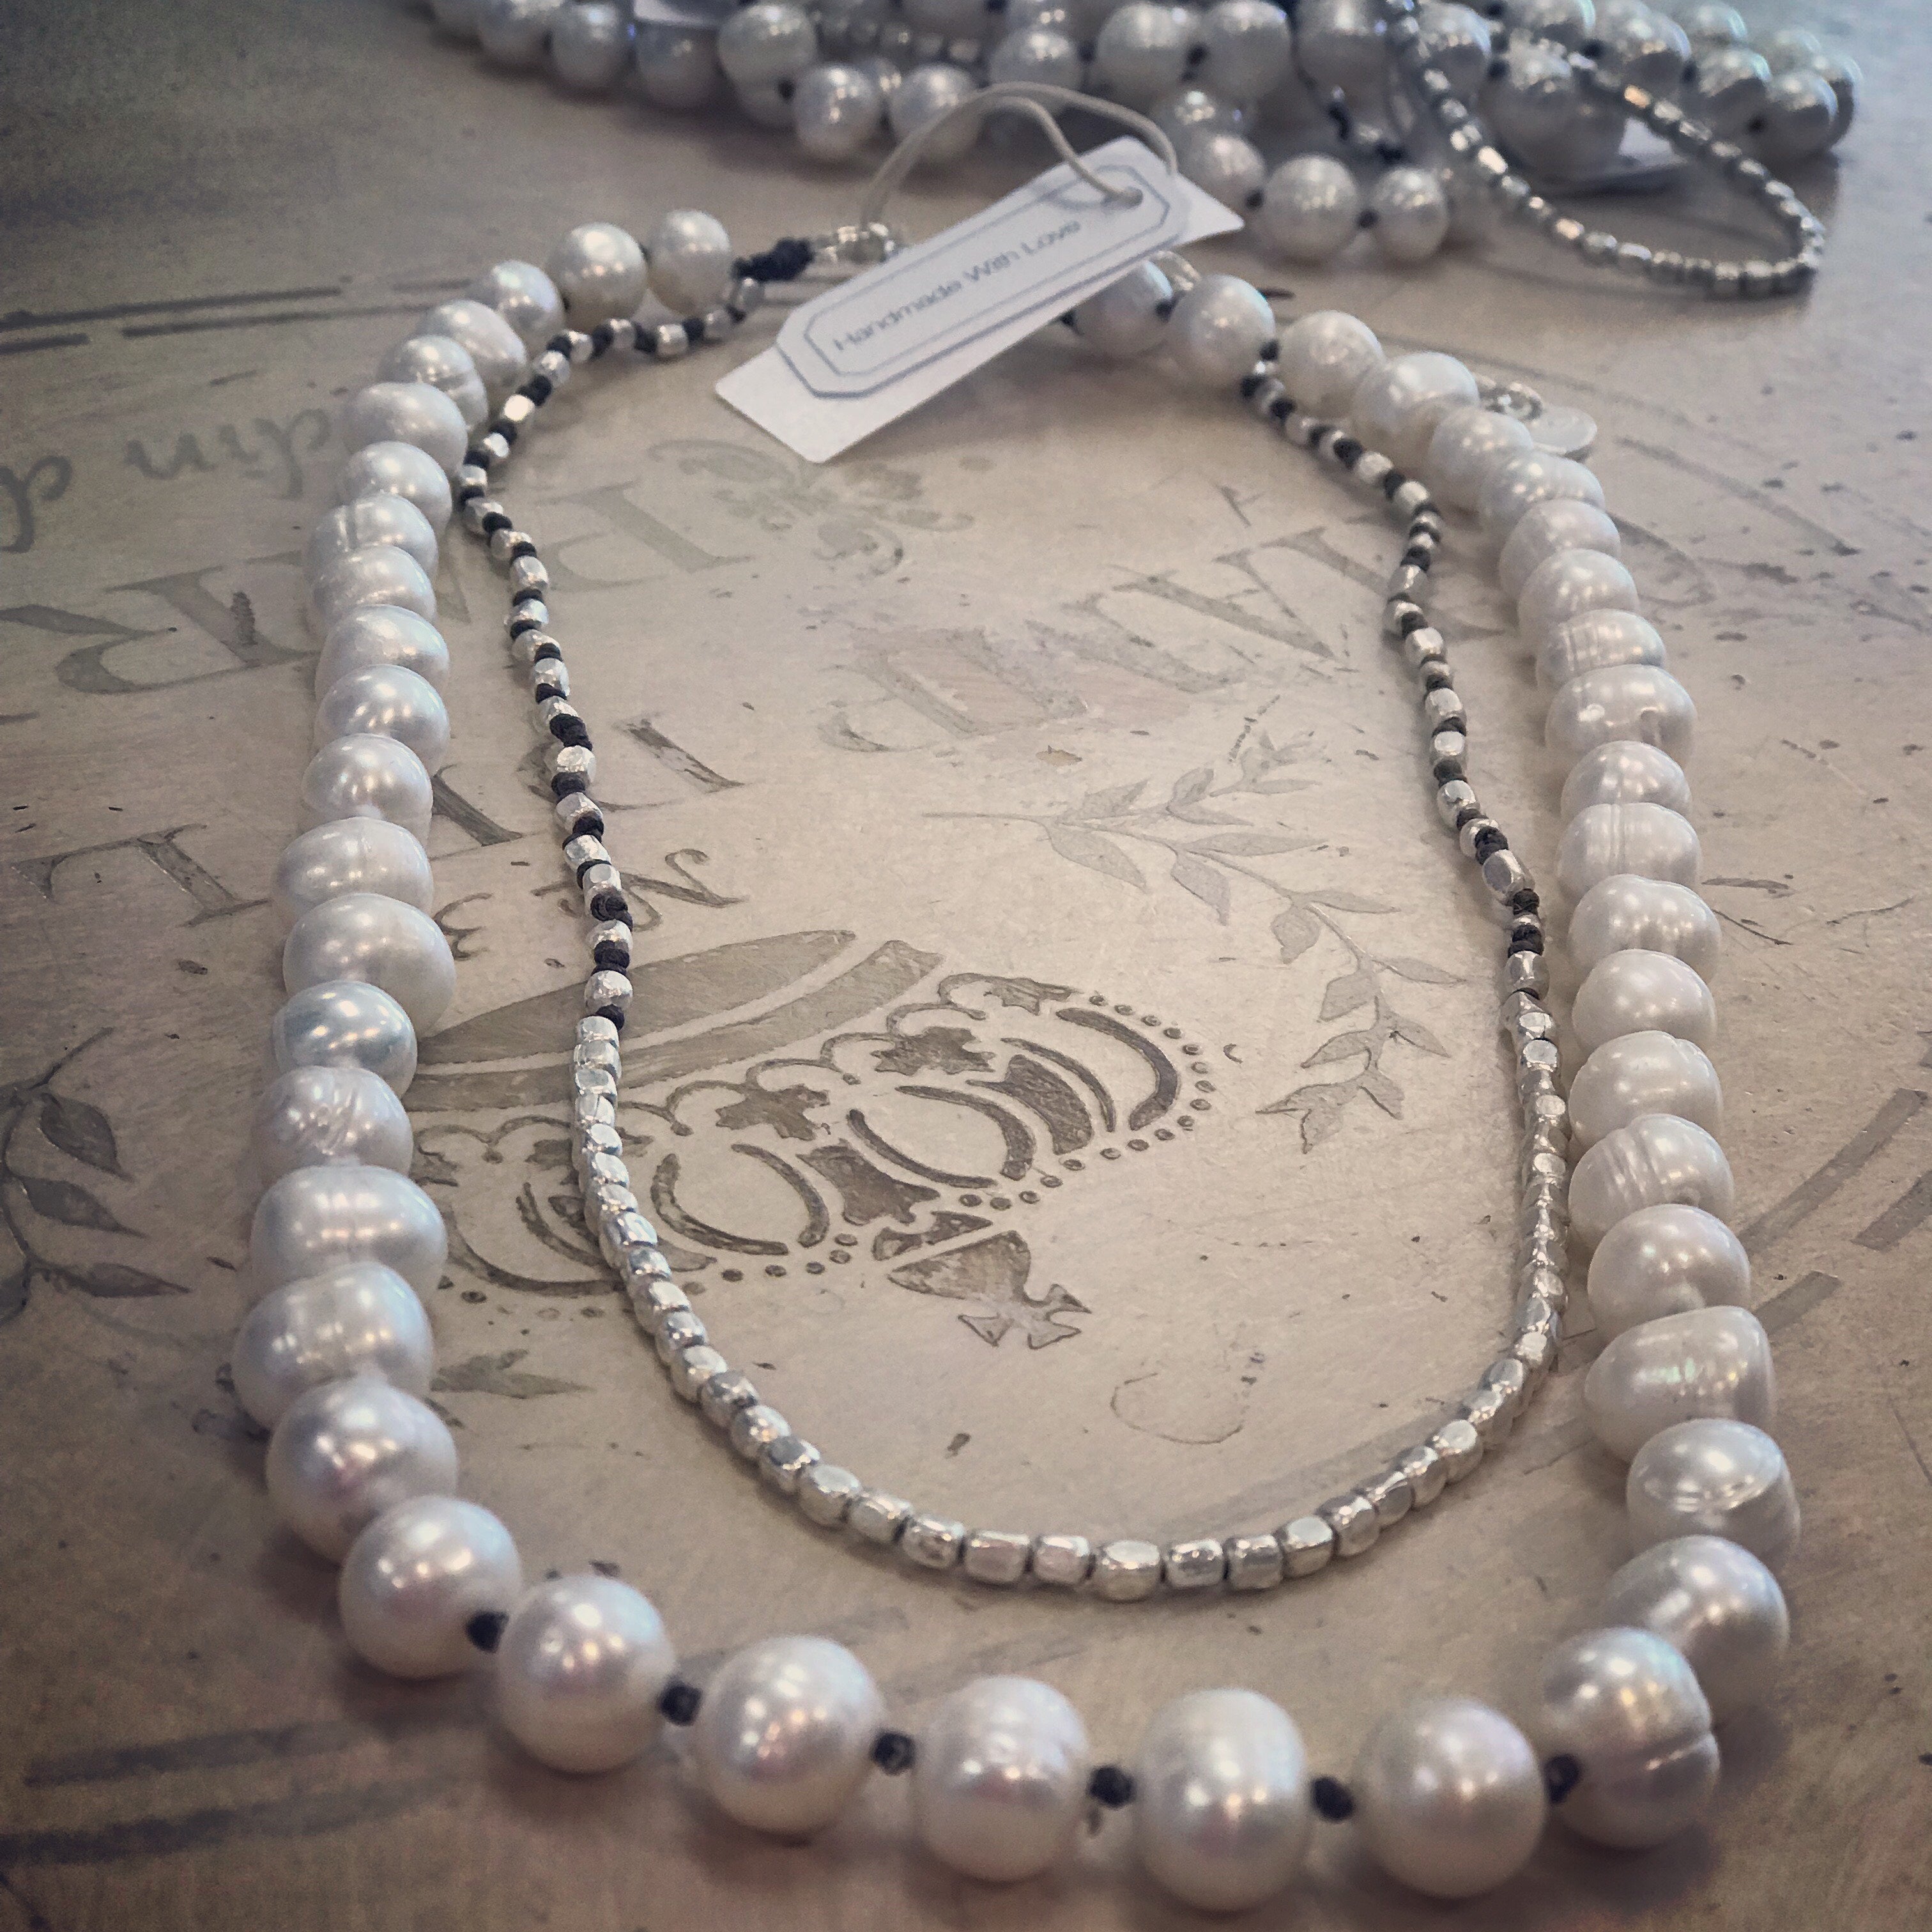 Fresh Water Pearl and Silver bead necklace from Nakamol